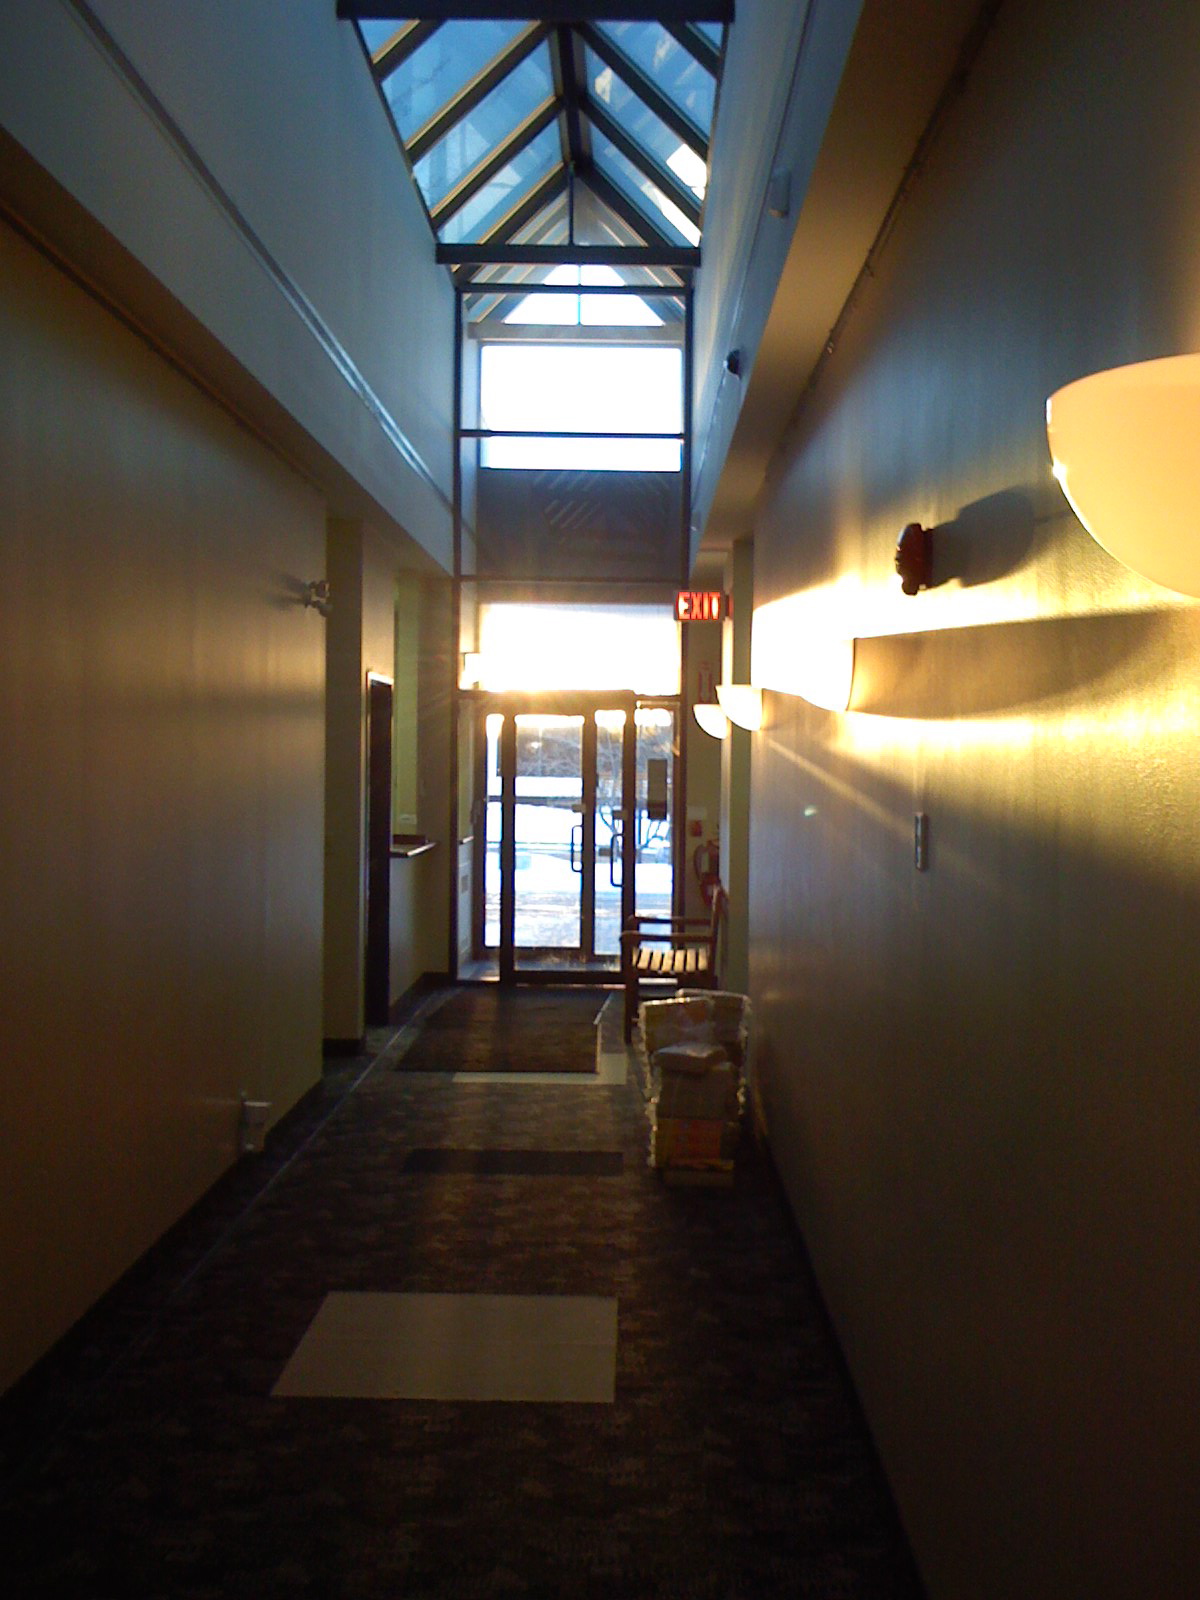 the hallway has some light on both sides